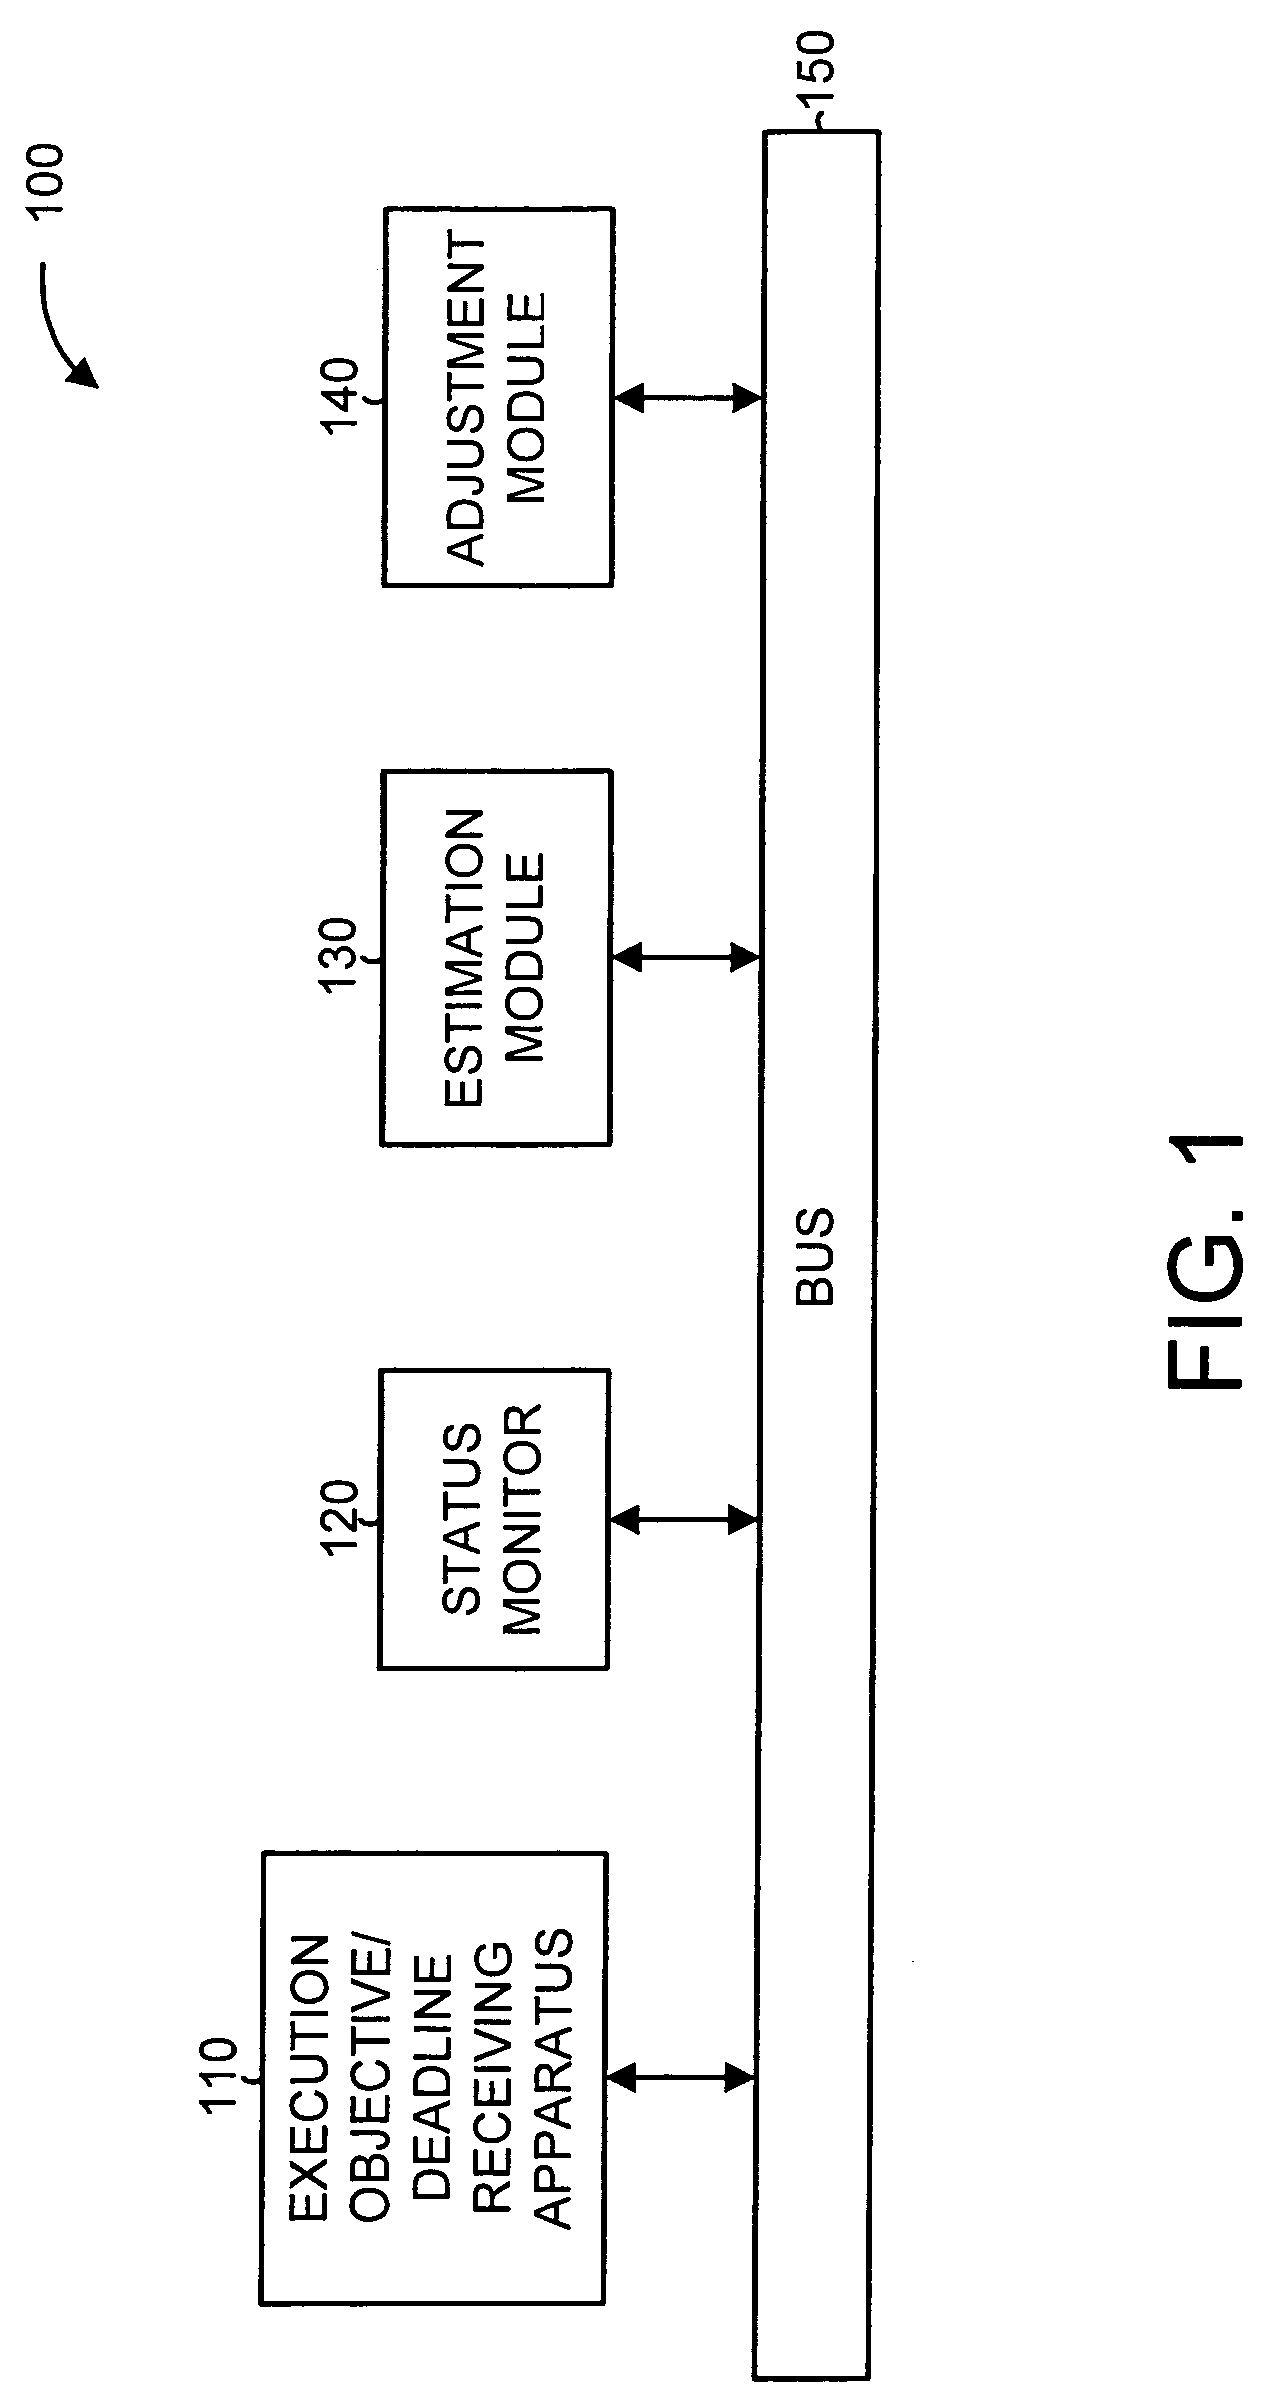 Systems and methods for resource-adaptive workload management